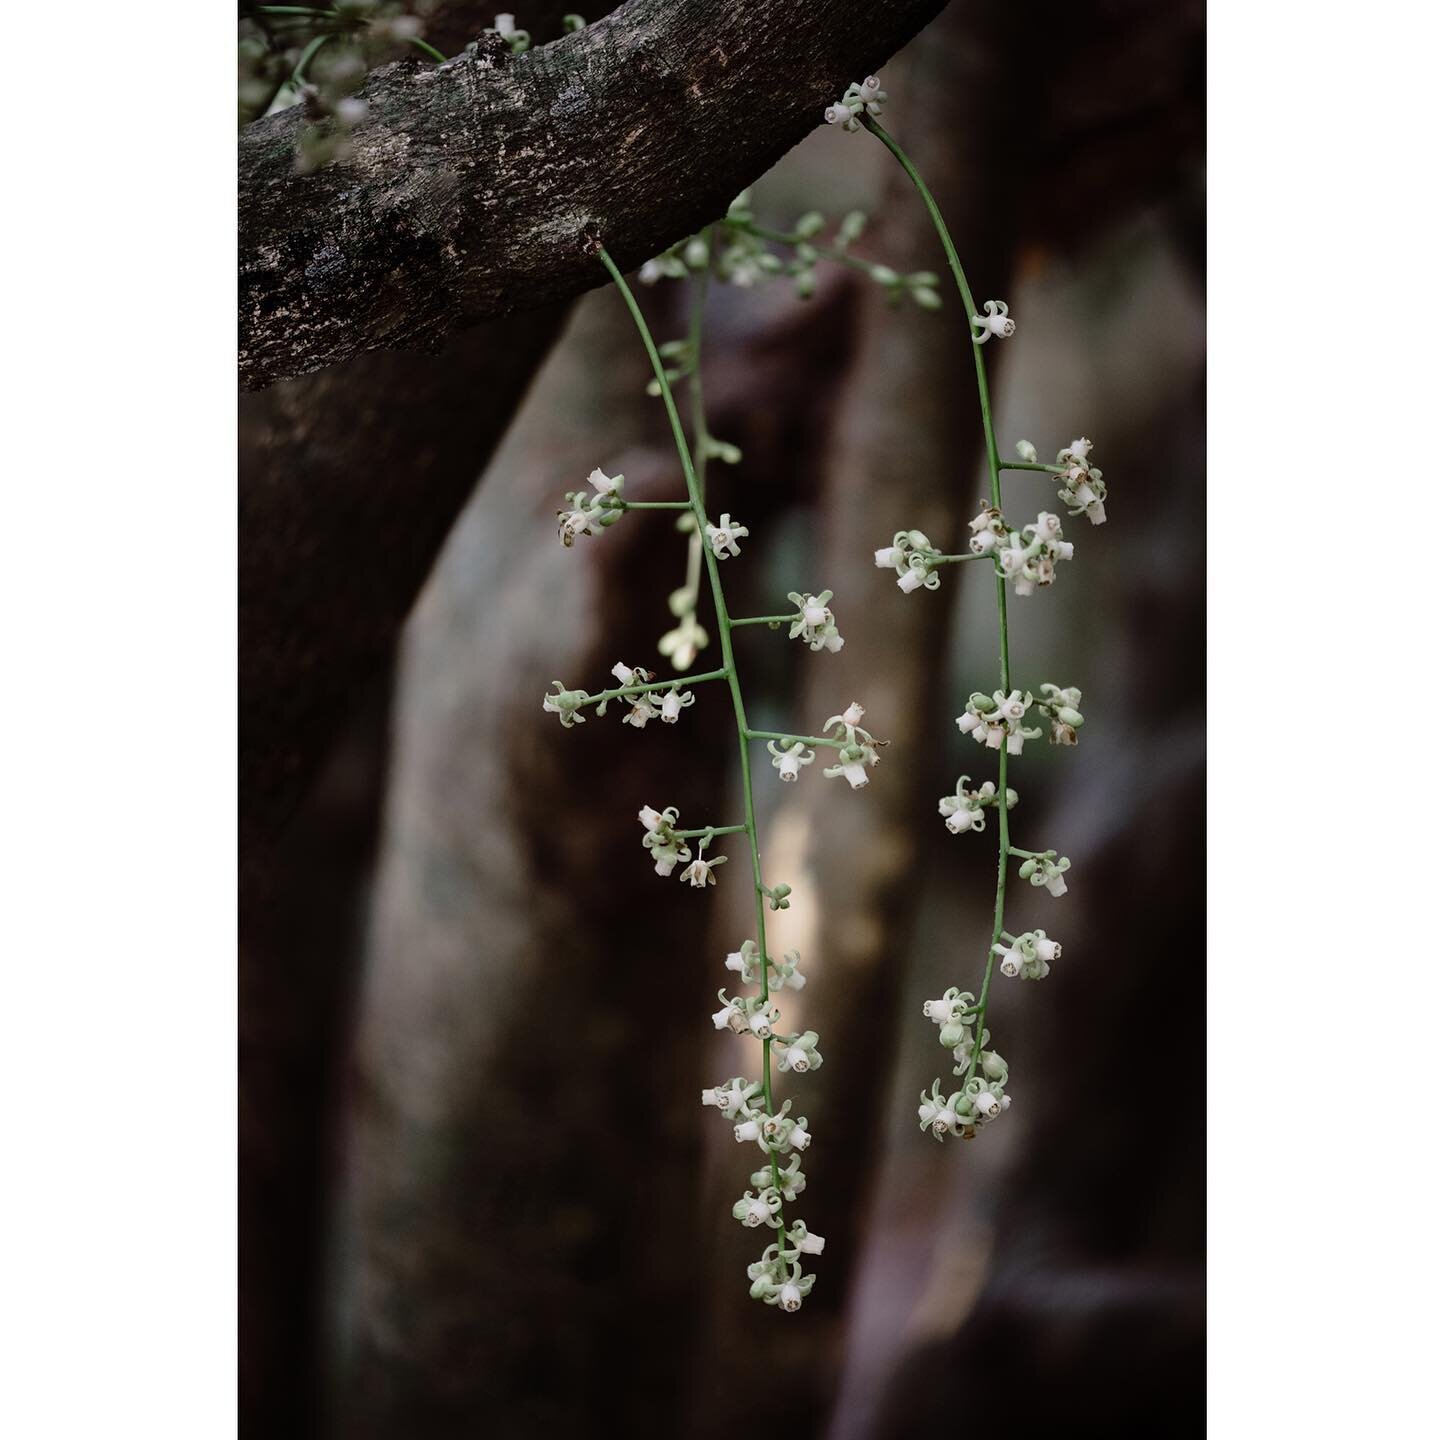 Kohekohe are currently in flower. What a magical and delicate flower growing from the trunk and branches of the tree. Two peaceful afternoons spent amongst these beautiful trees looking closely through the lens.
.
.
.
.
.
#kohekohe #macro #paekakarik